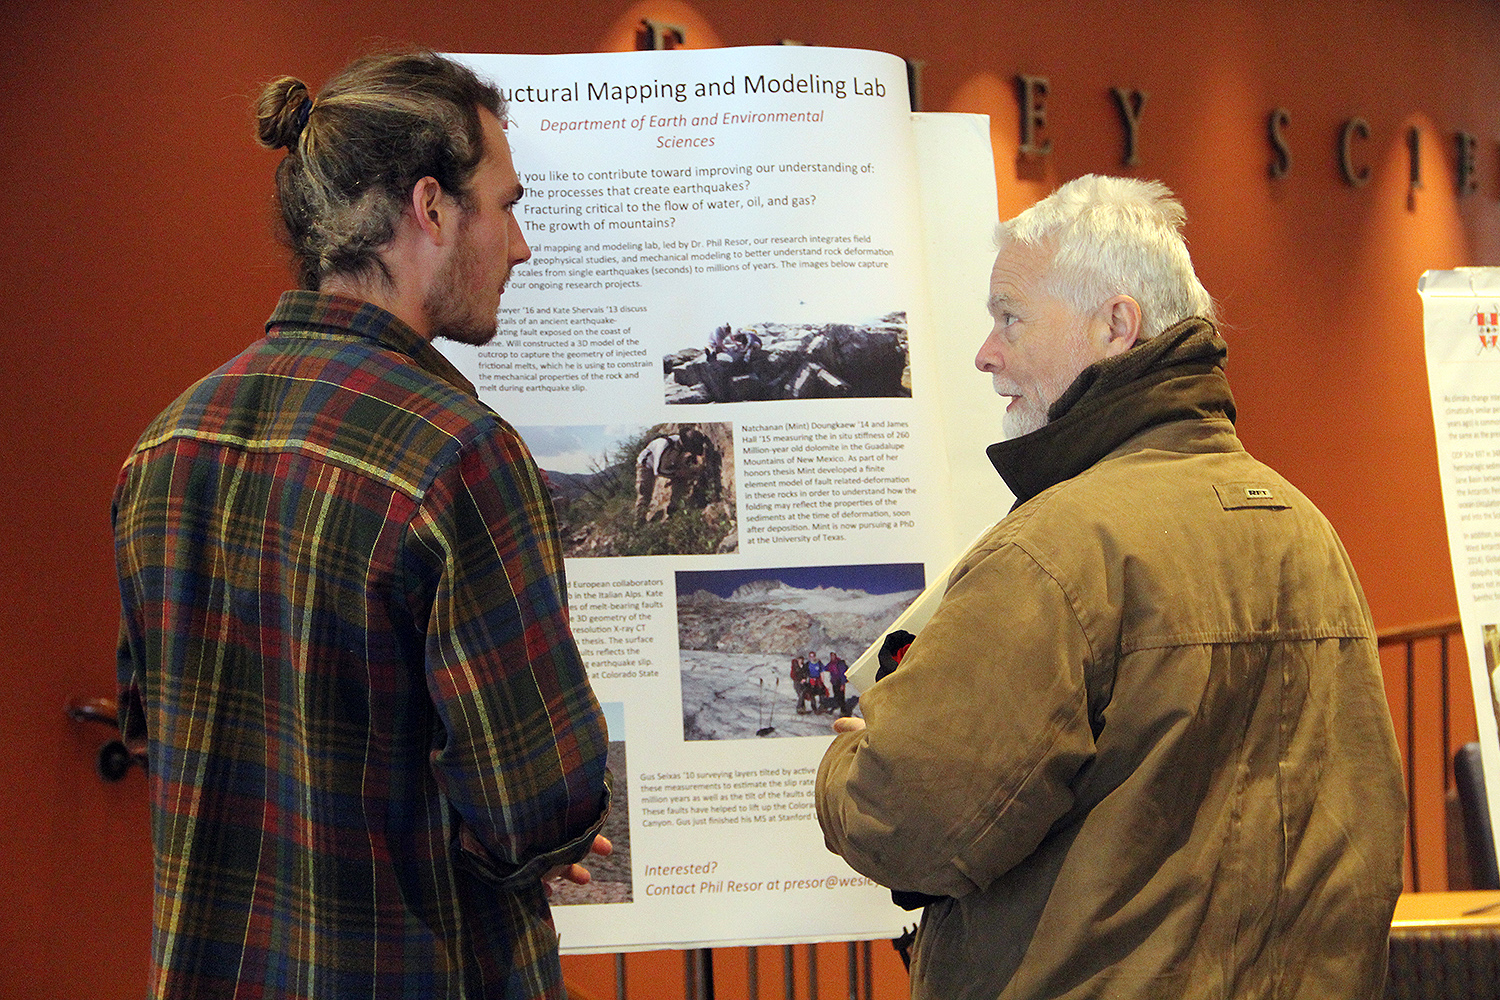 Will Sawyer ’16 presented research on “Structural Mapping and Modeling,” where he fielded observations, geographical studies, and mechanical modeling to better understand rock deformation.